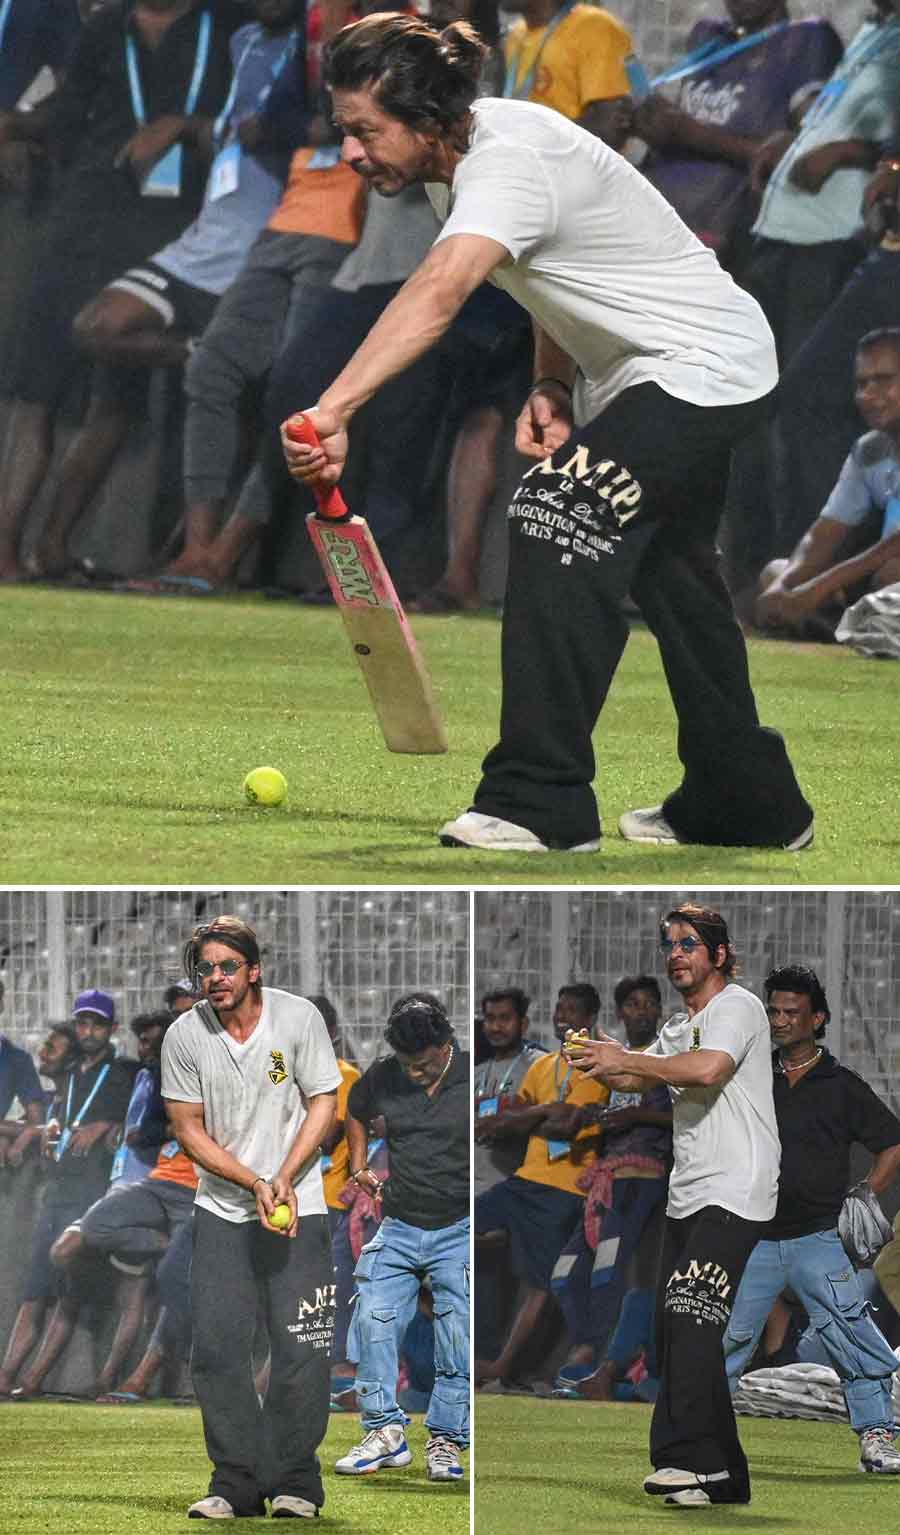 Batting. Check. Bowling. Check. Fielding. Check. A day before the Kolkata Knight Riders vs Delhi Capitals match on Monday, Shah Rukh Khan was seen trying his hand in every department of the game at the Eden Gardens